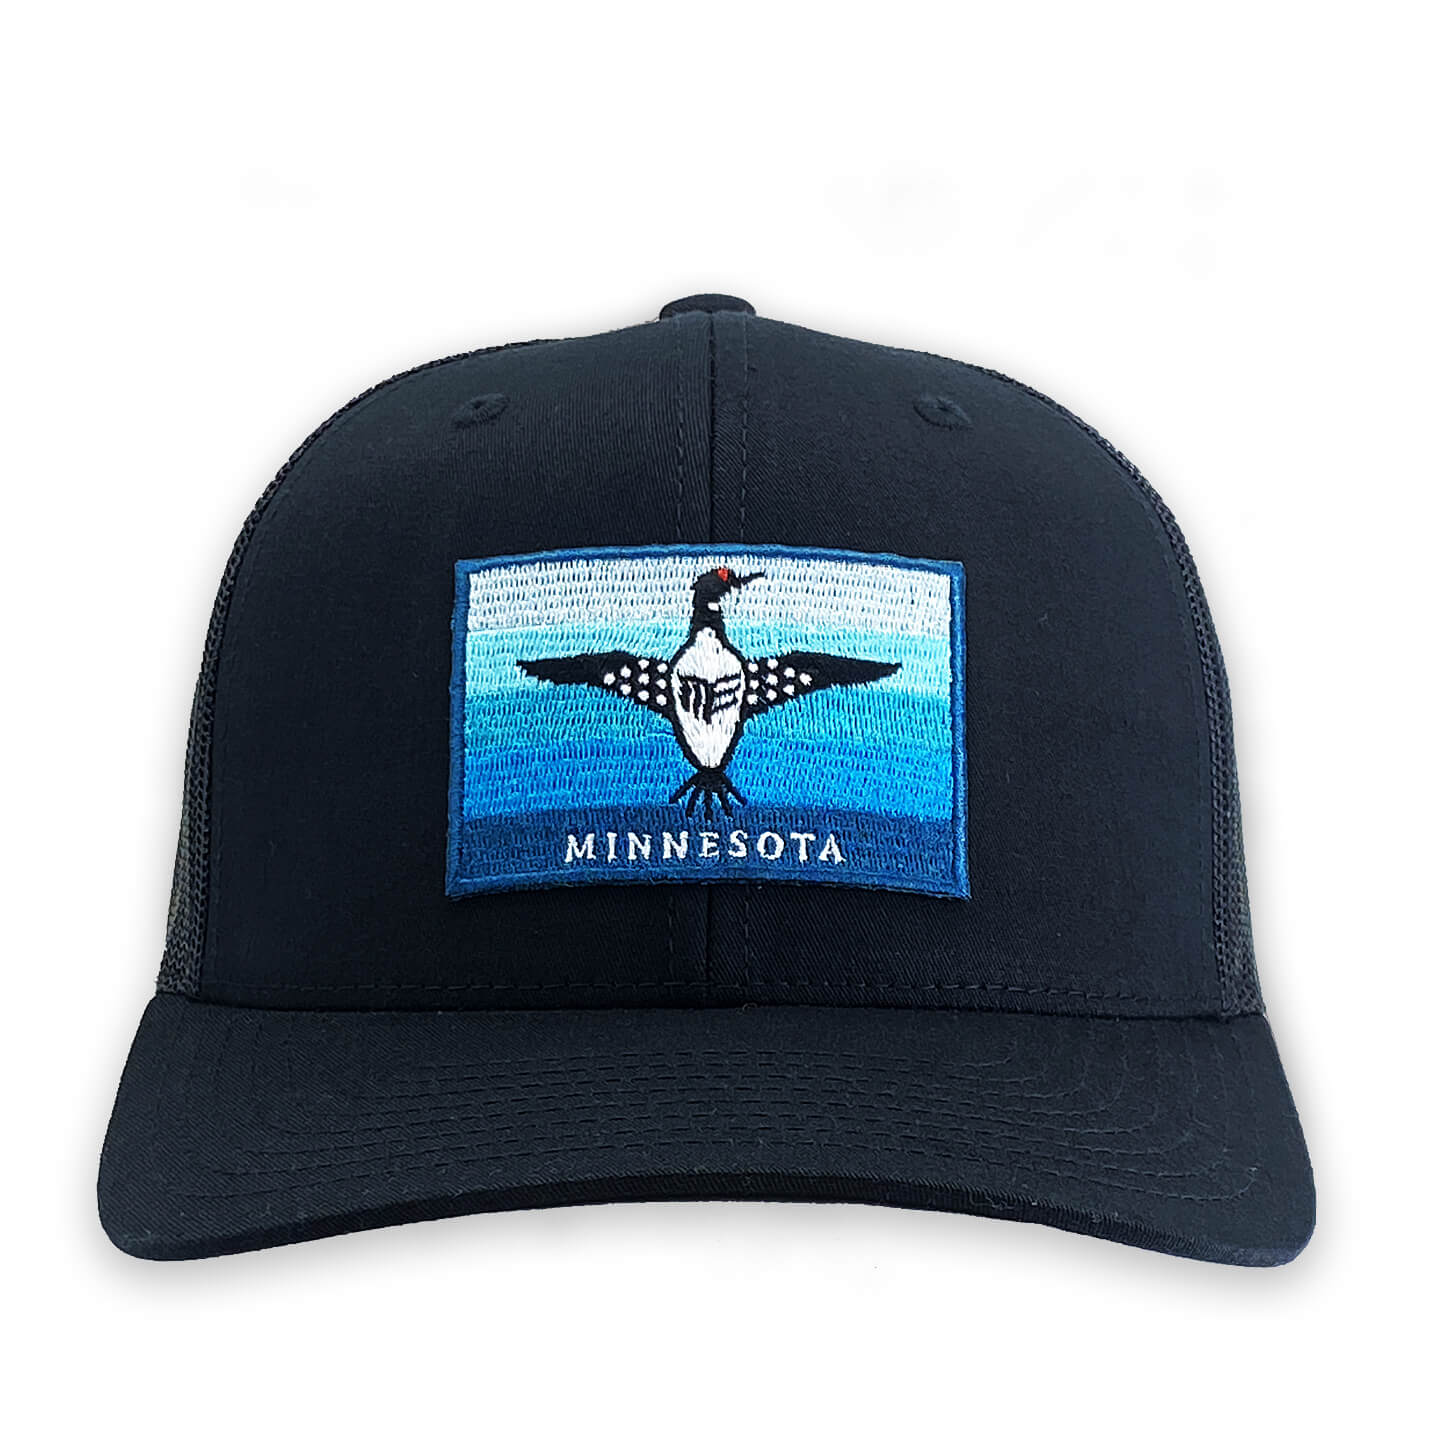 Black color 6 panel snapback hat with Loon on Blue Flag embroidery patch